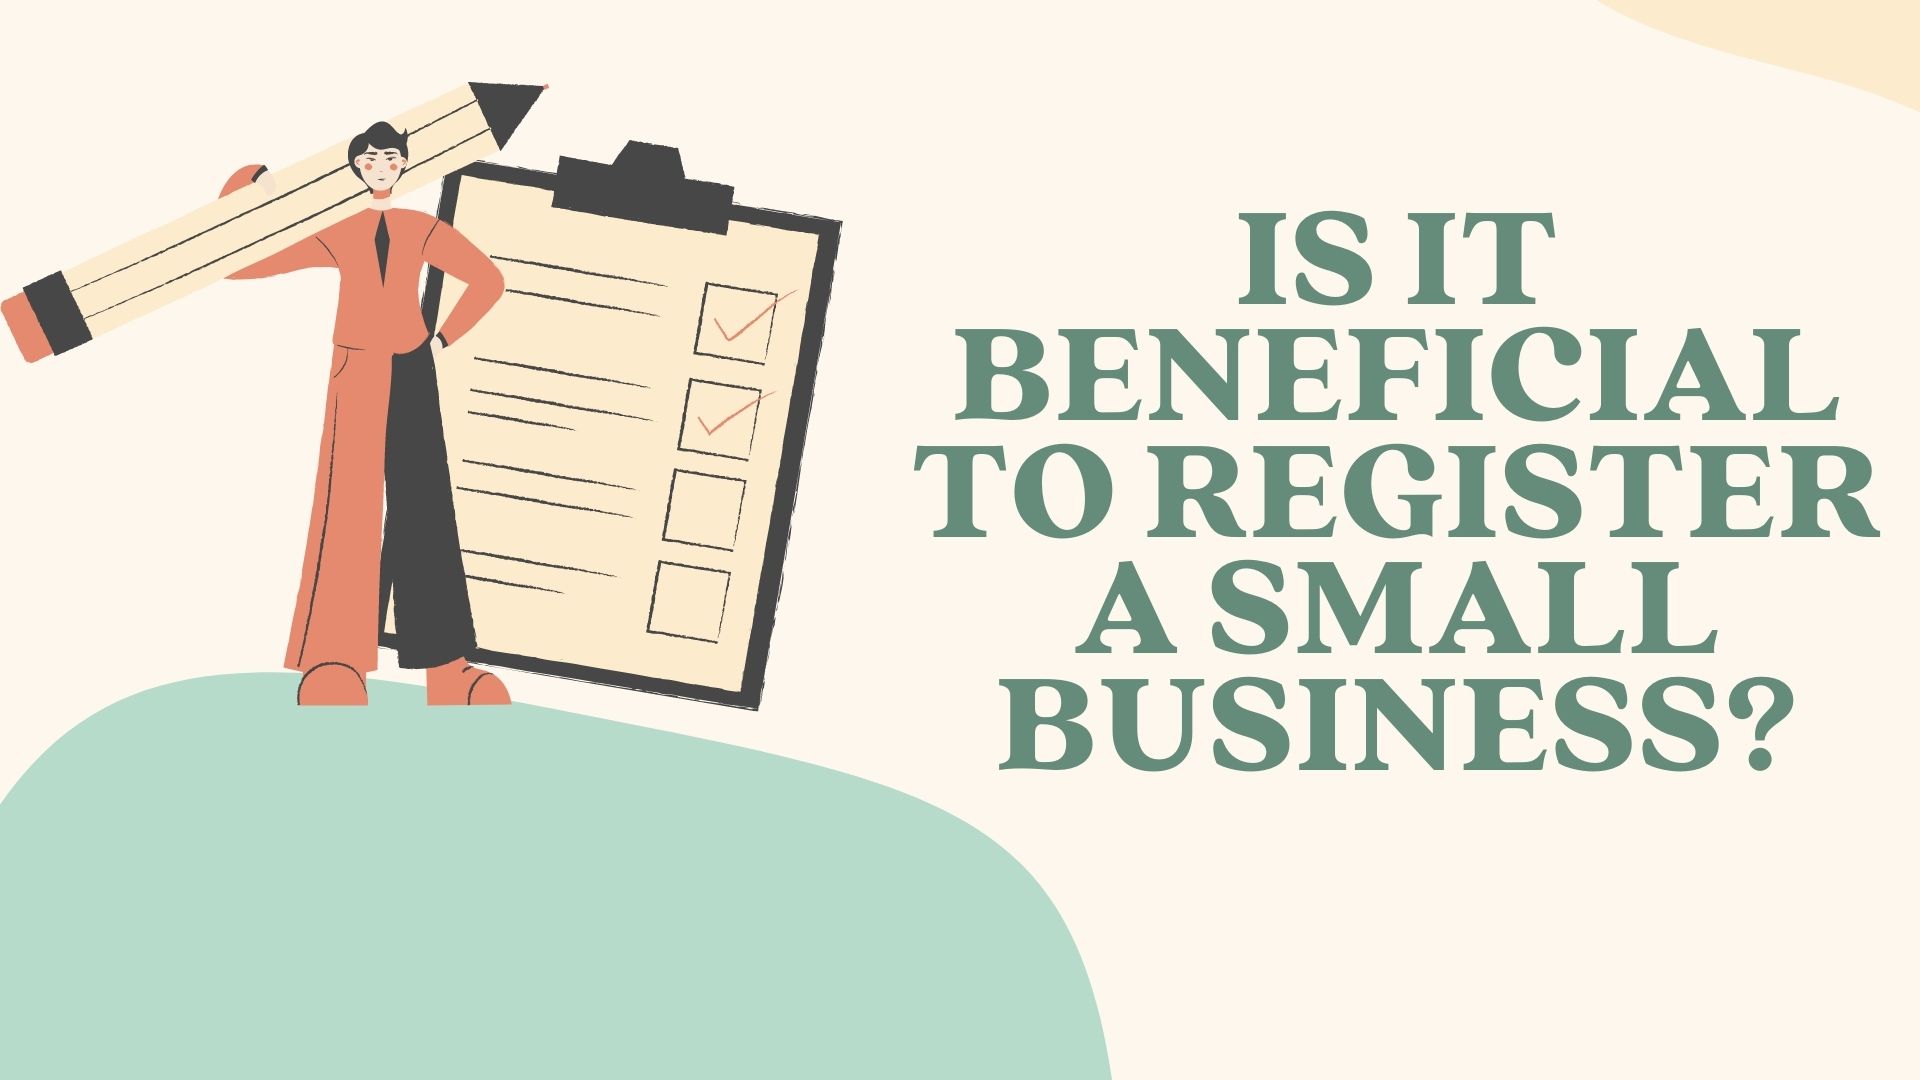 Is It Beneficial to Register a Small Business